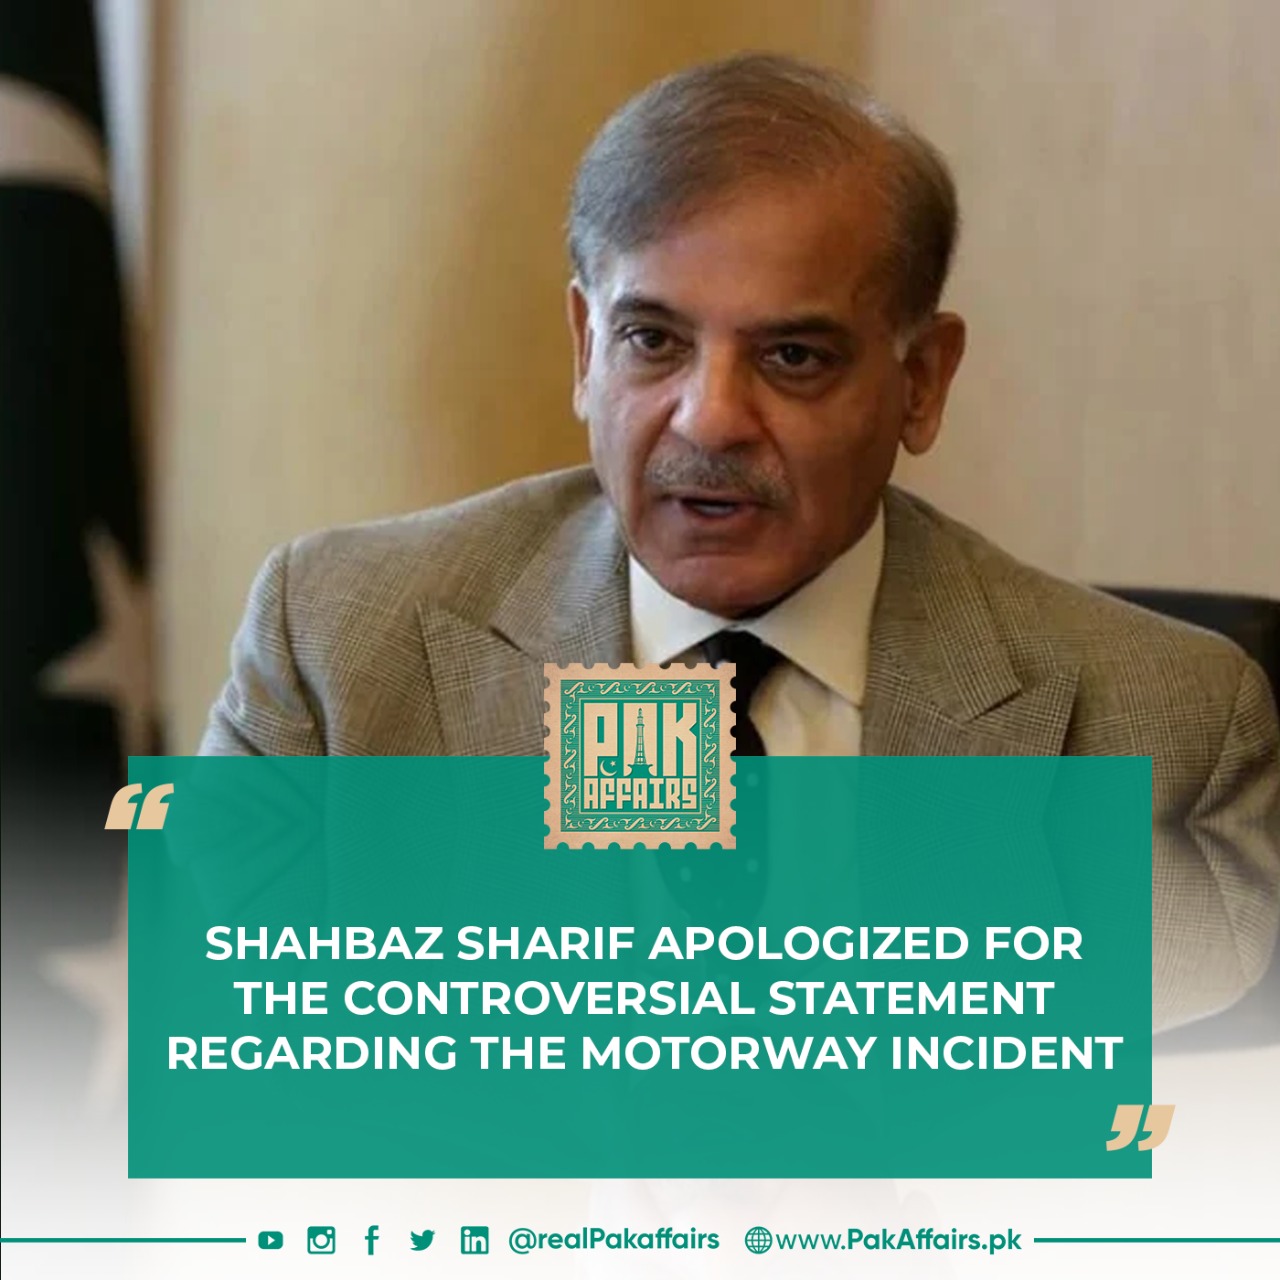 Shahbaz Sharif apologized for the controversial statement regarding the motorway incident.